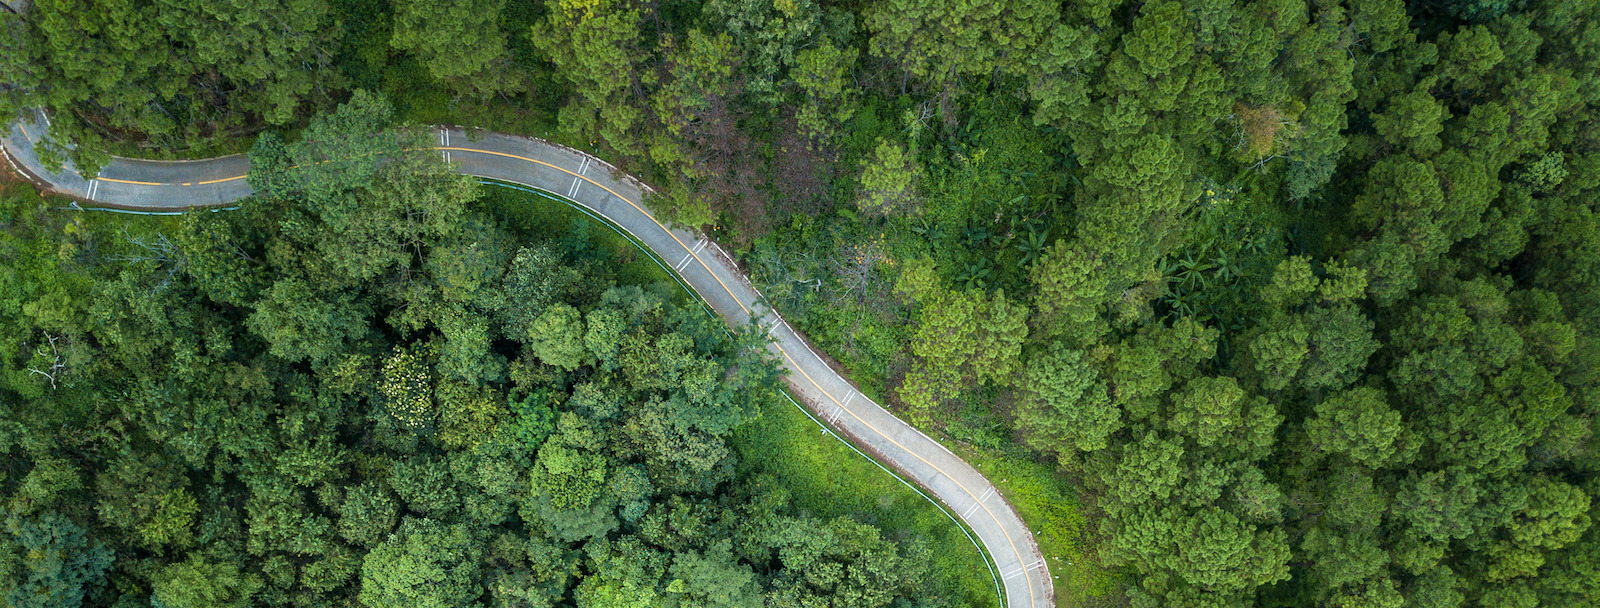  A road winds through a lush green forest, representing the journey of AI talent development in Malaysia.